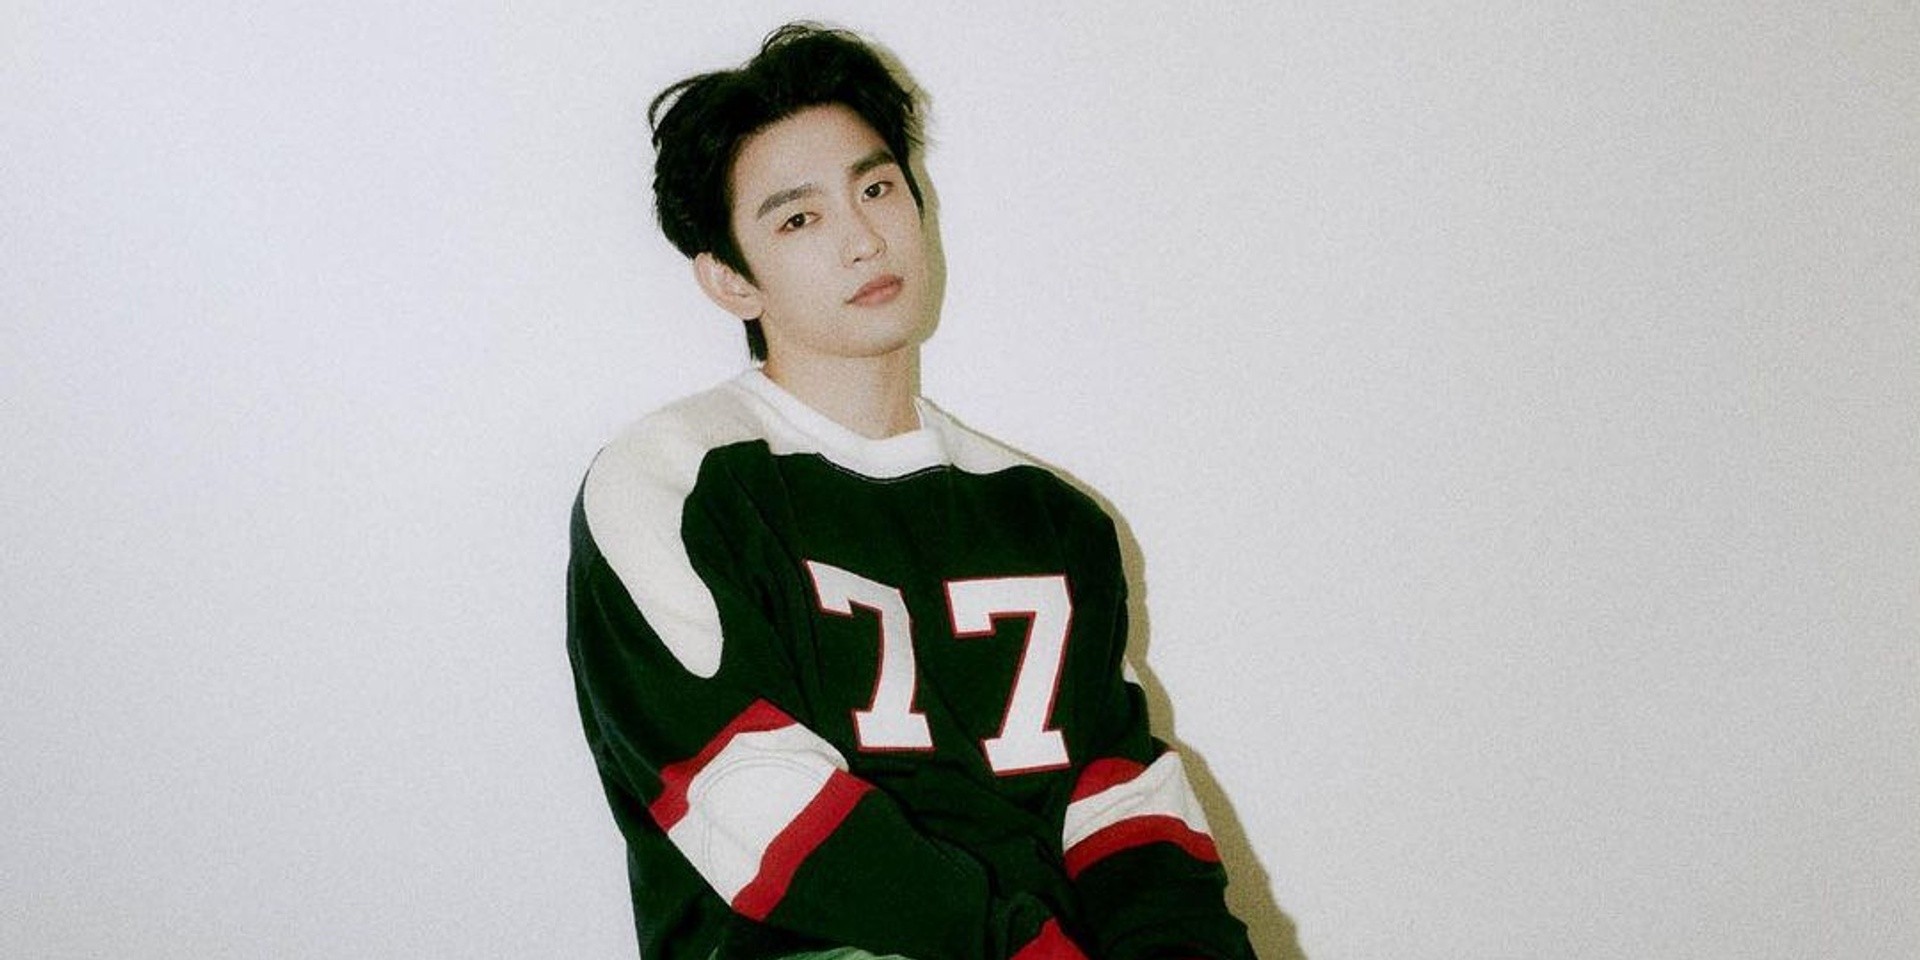 GOT7's JINYOUNG unveils first solo album 'Chapter 0: WITH' — listen